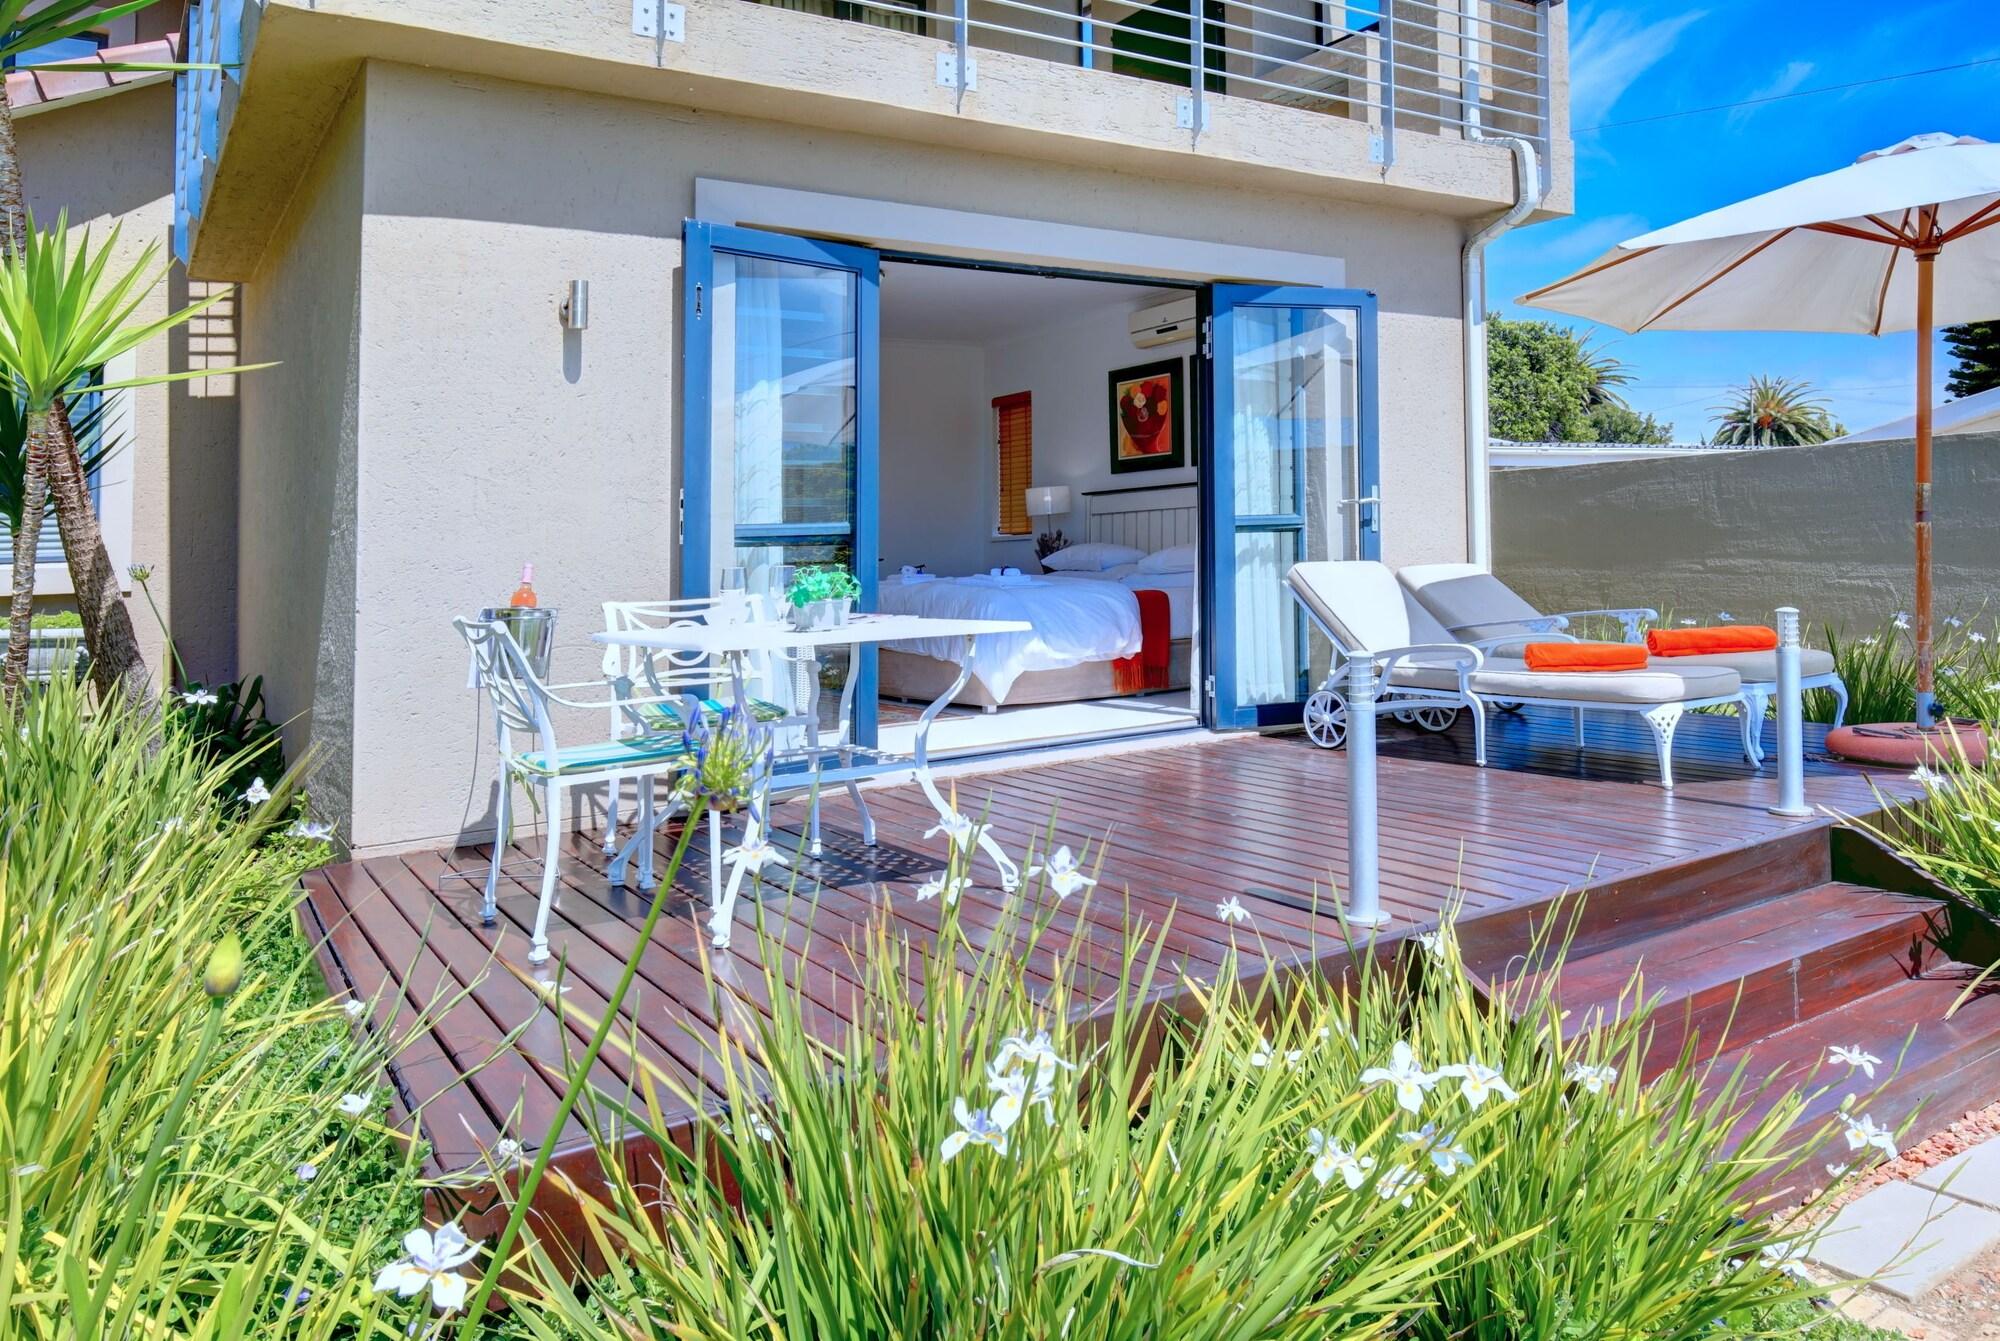 Linkside 2 Self-Catering Hotel Mossel Bay Exterior photo